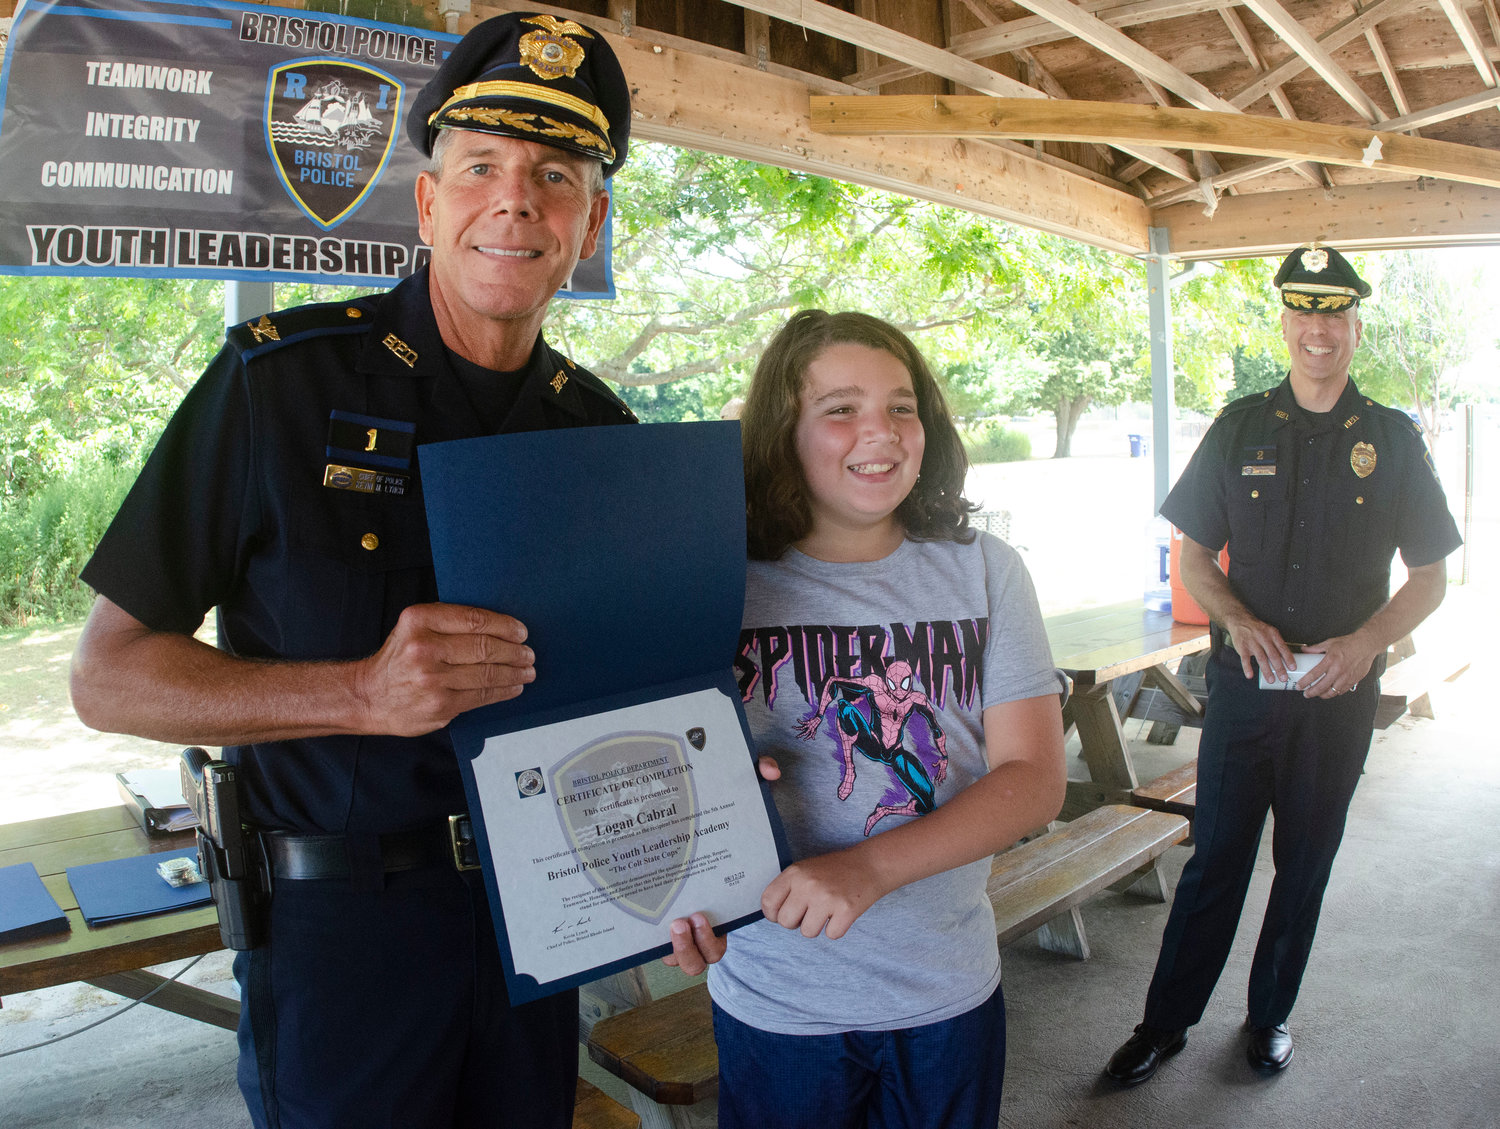 Bristol Police Chief Kevin Lynch (left) and Major Brian Burke pose with Logan Cabral after she received a certificate for passing the leadership academy at the town beach on Friday.